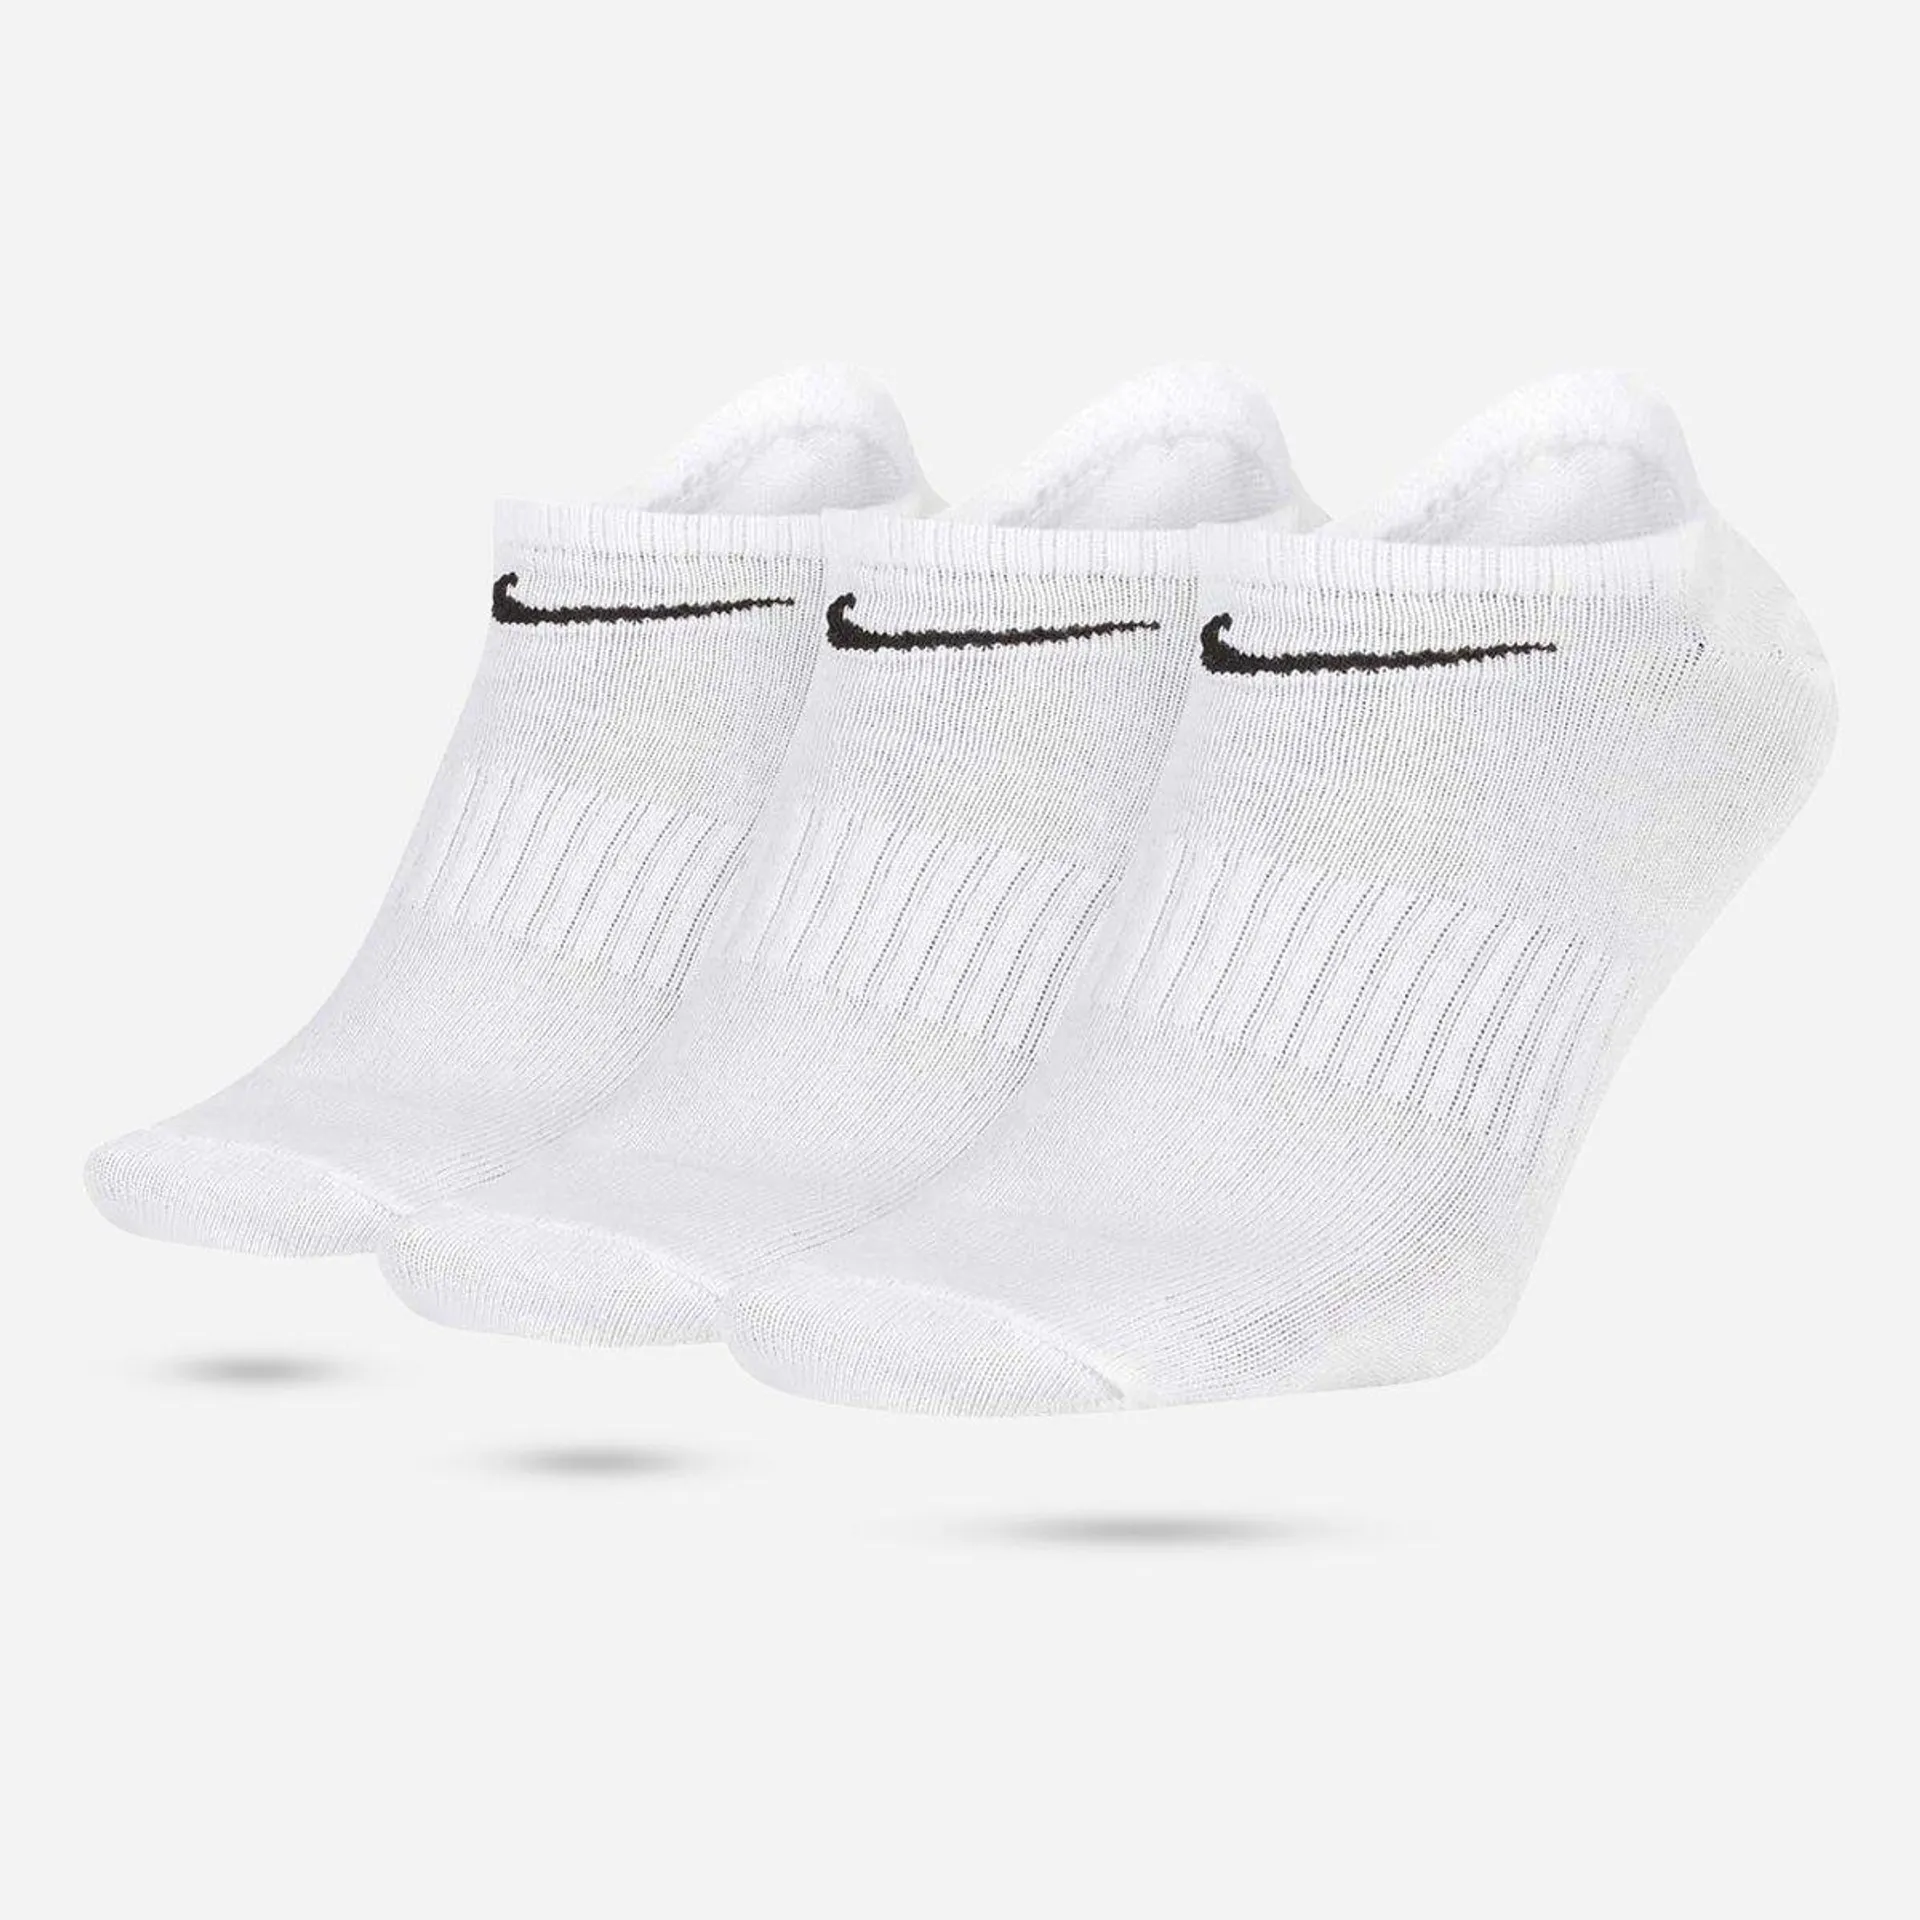 Nike Everyday Lightweight No-Show 3-Pack